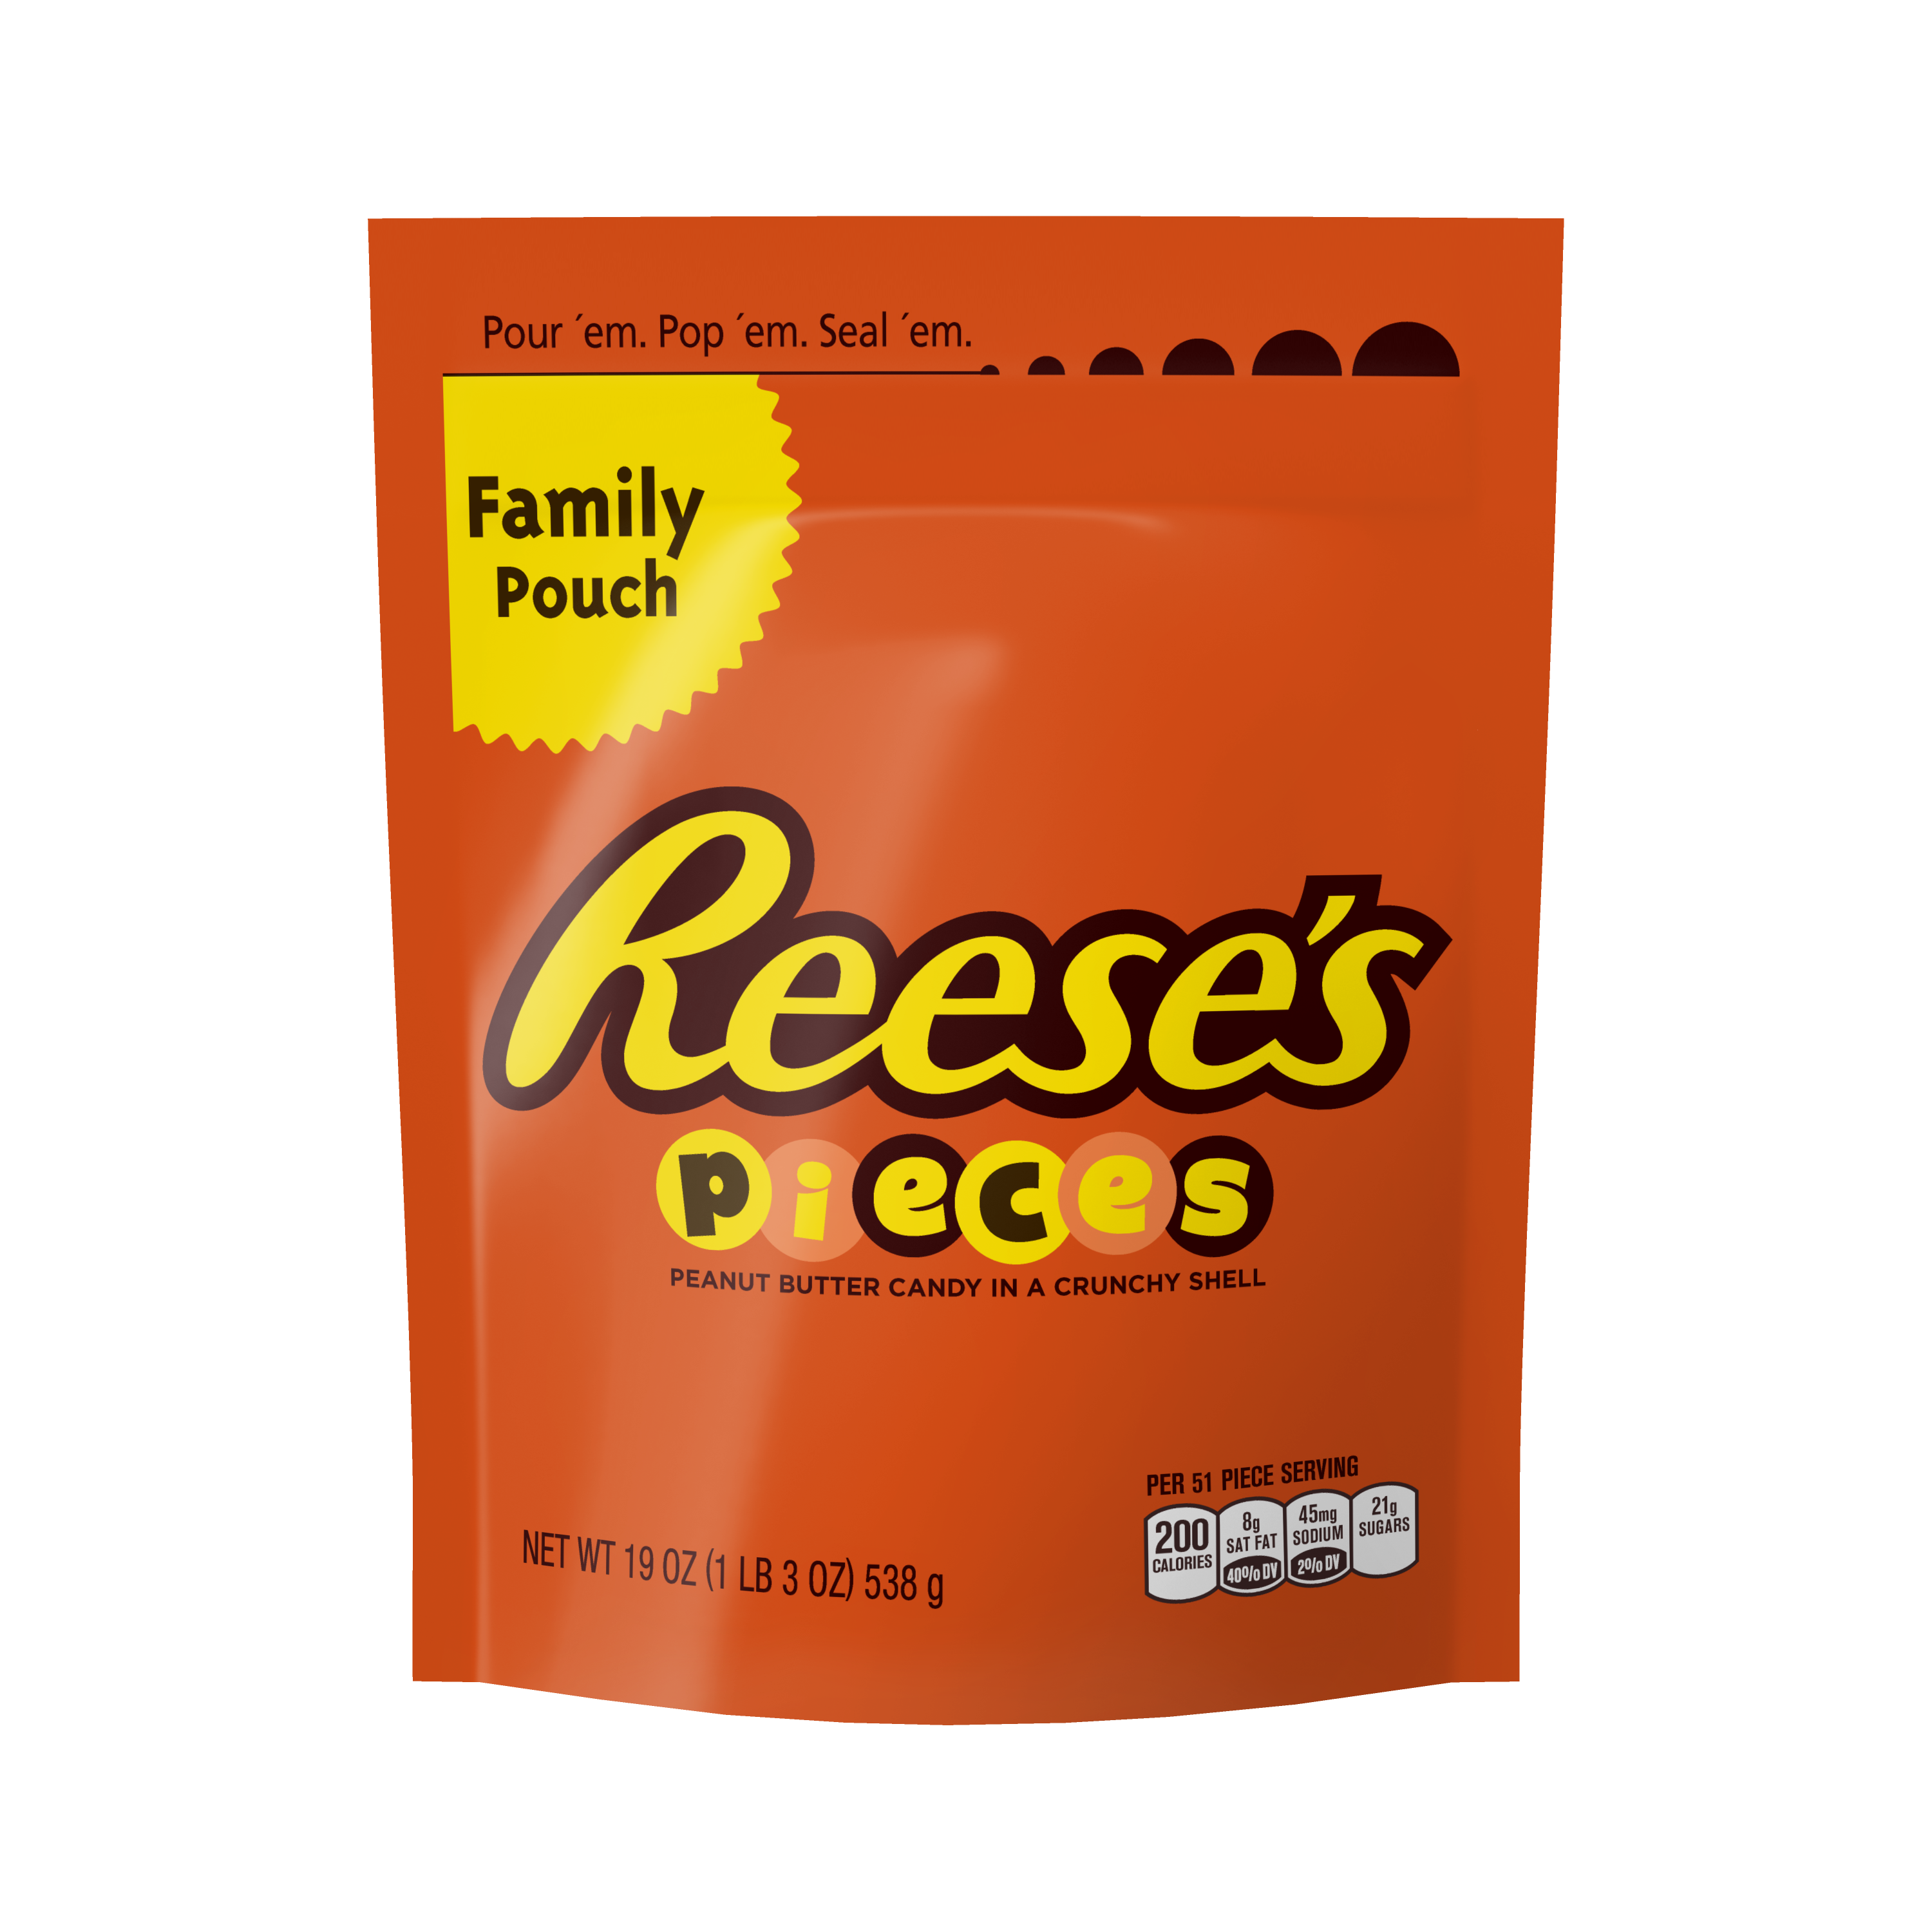 Reese's Pieces Peanut Butter Candy, 19 Oz. - image 1 of 7